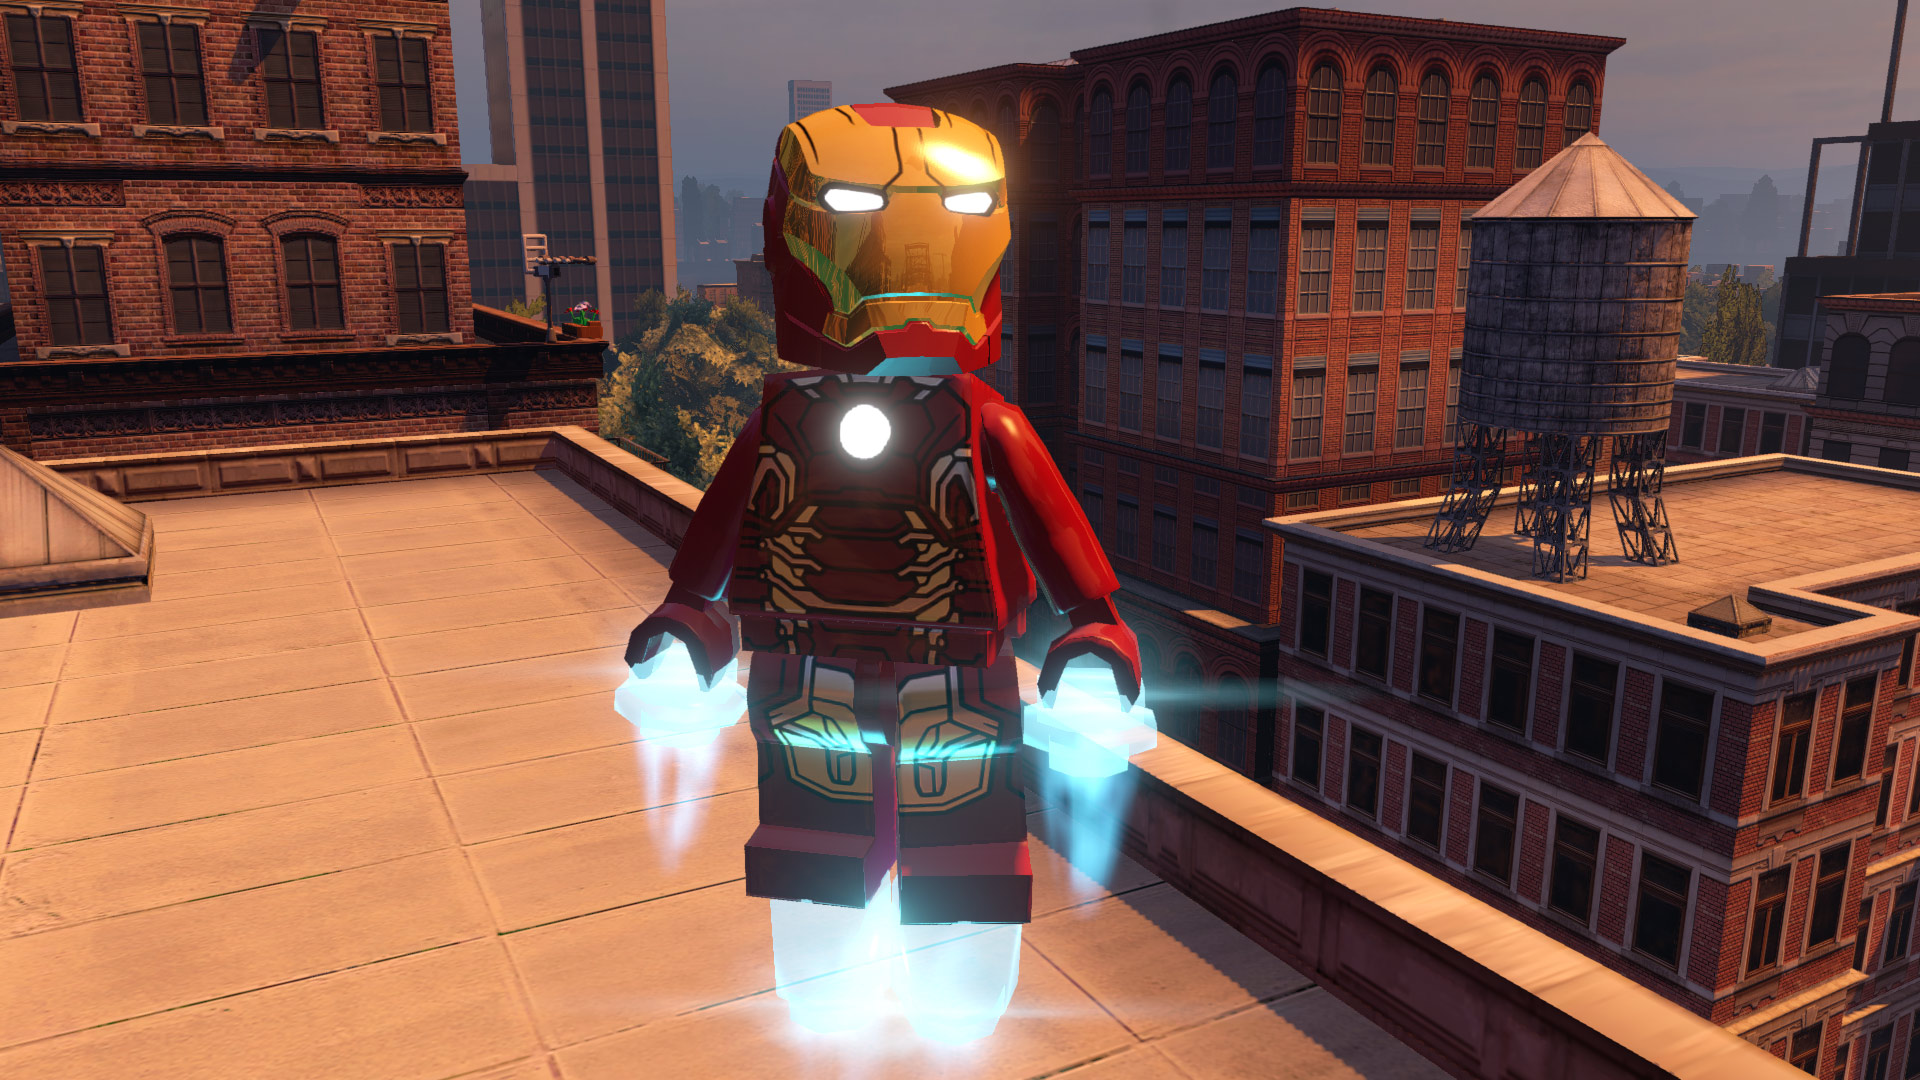 lego avengers pc download